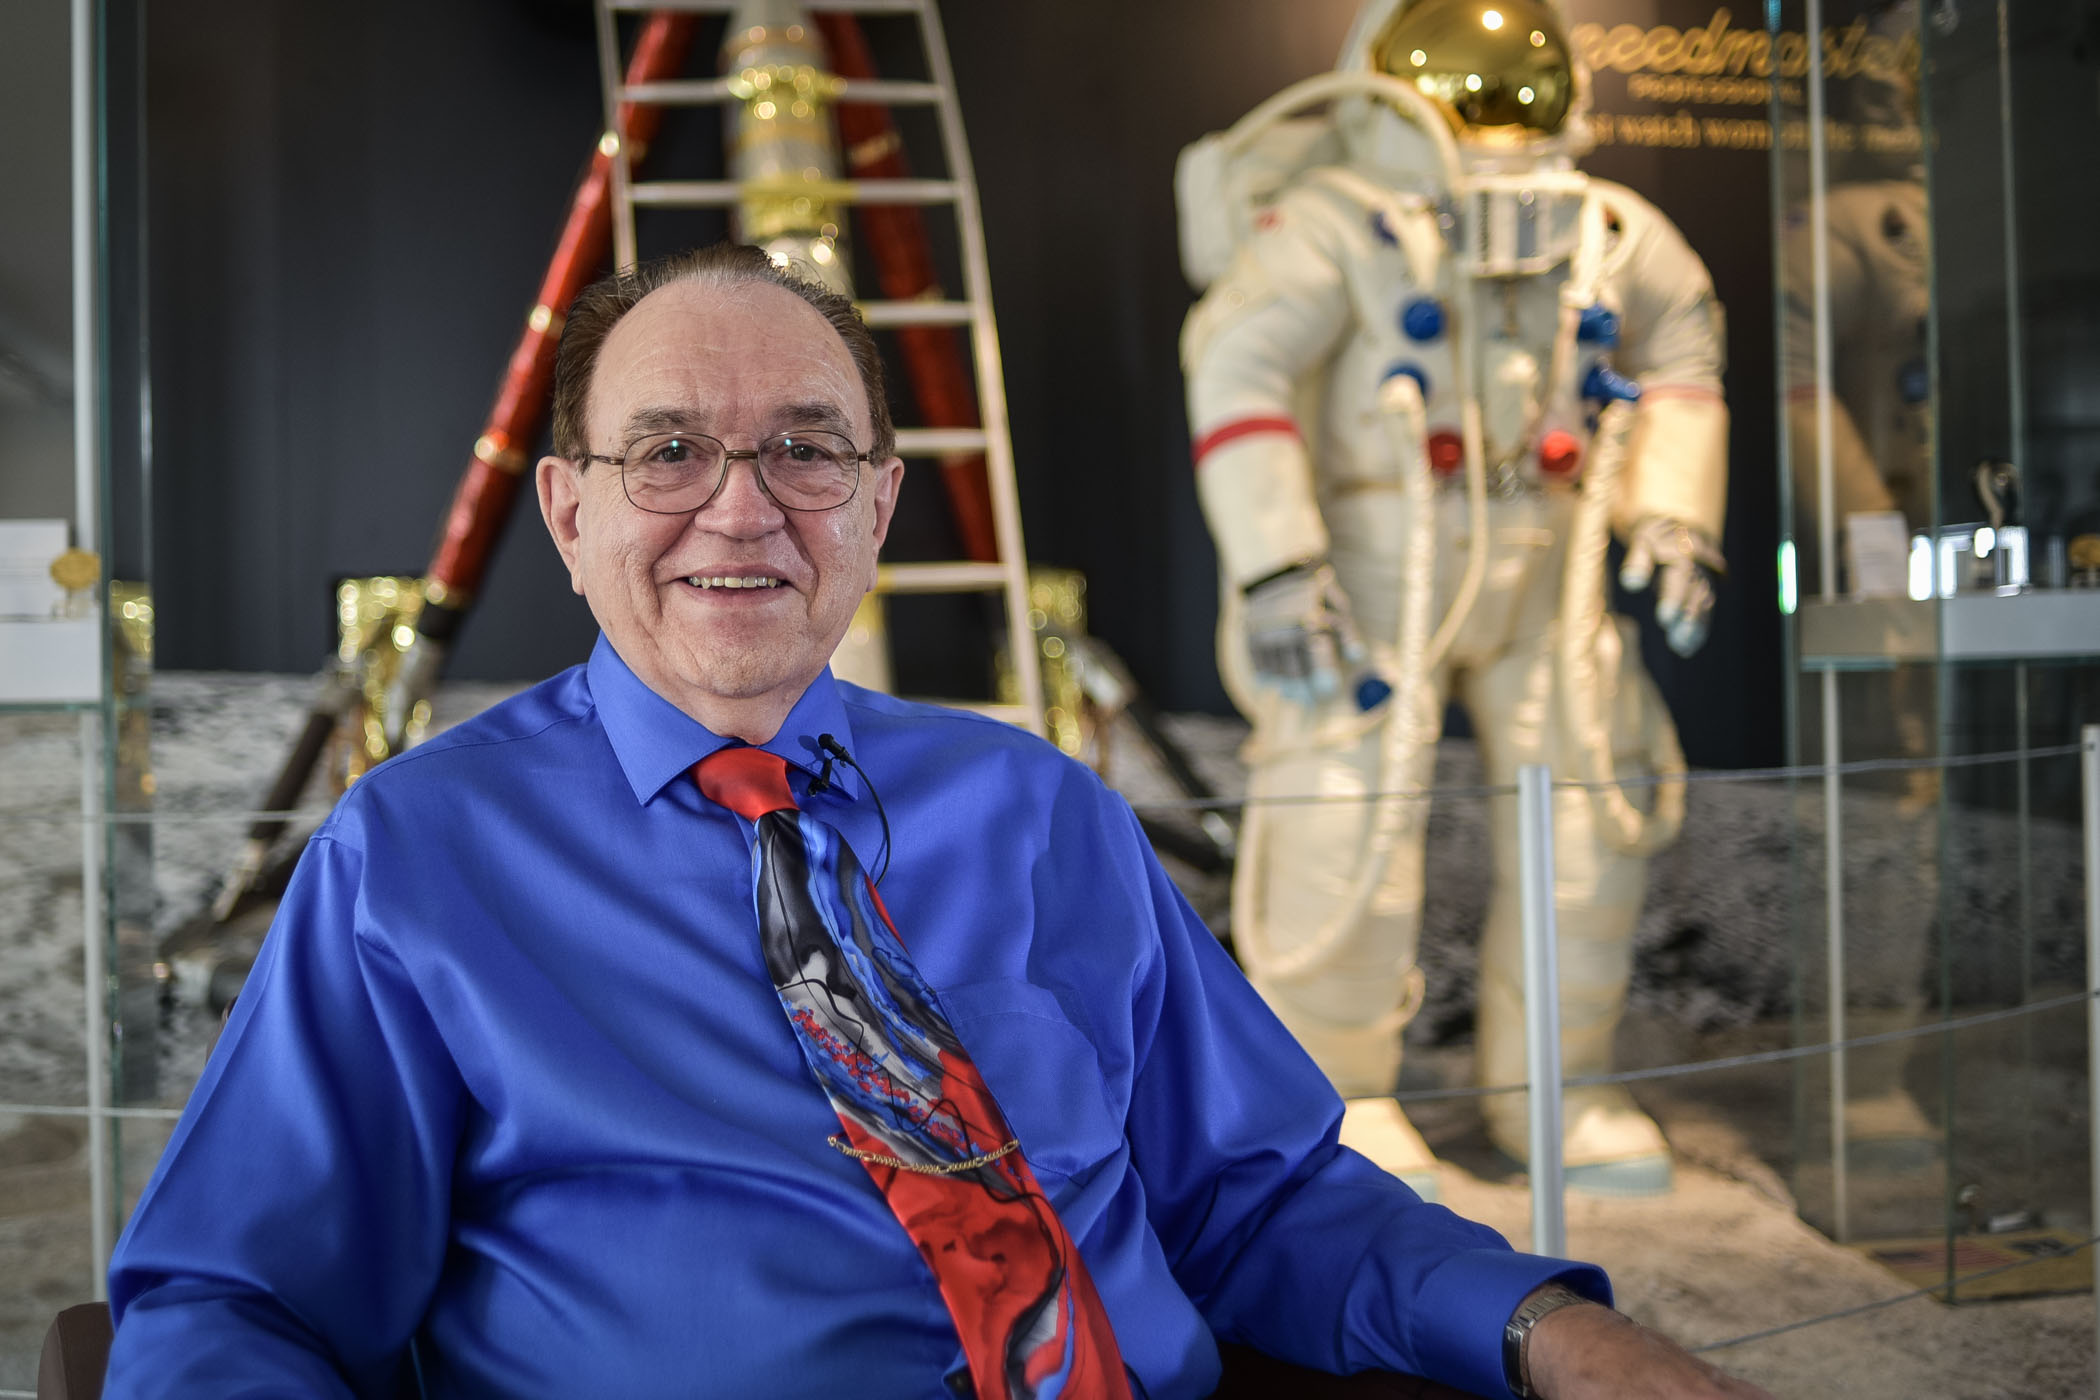 Moon Landing 50 - How The Omega Speedmaster Professional Became the Moonwatch By James H. Ragan NASA